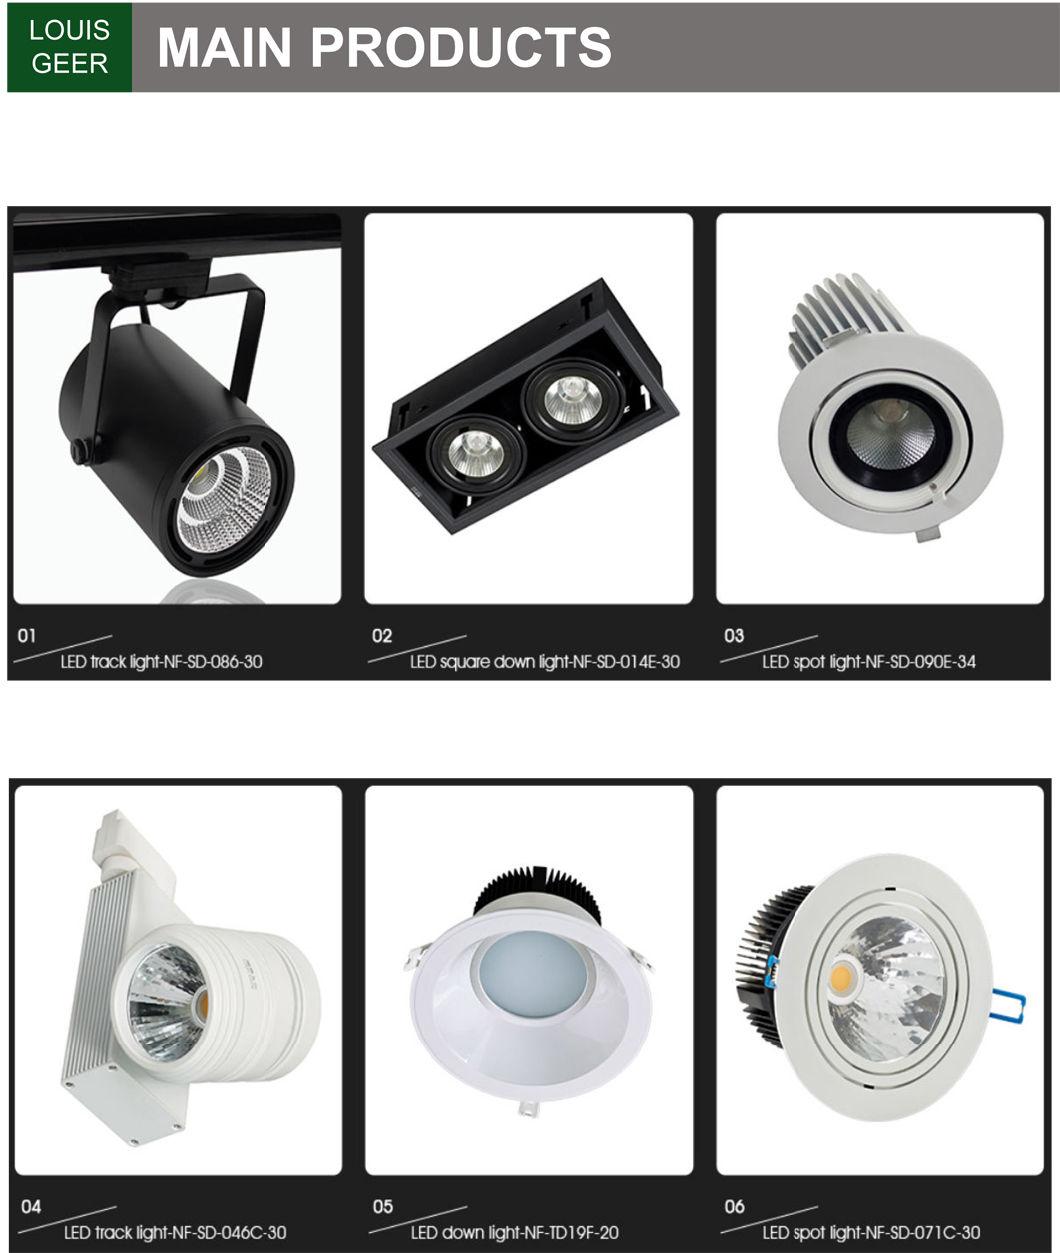 10W-50W 2020 New Design Recessed Factory Price LED Downlight Warm White Color LED Spot Light